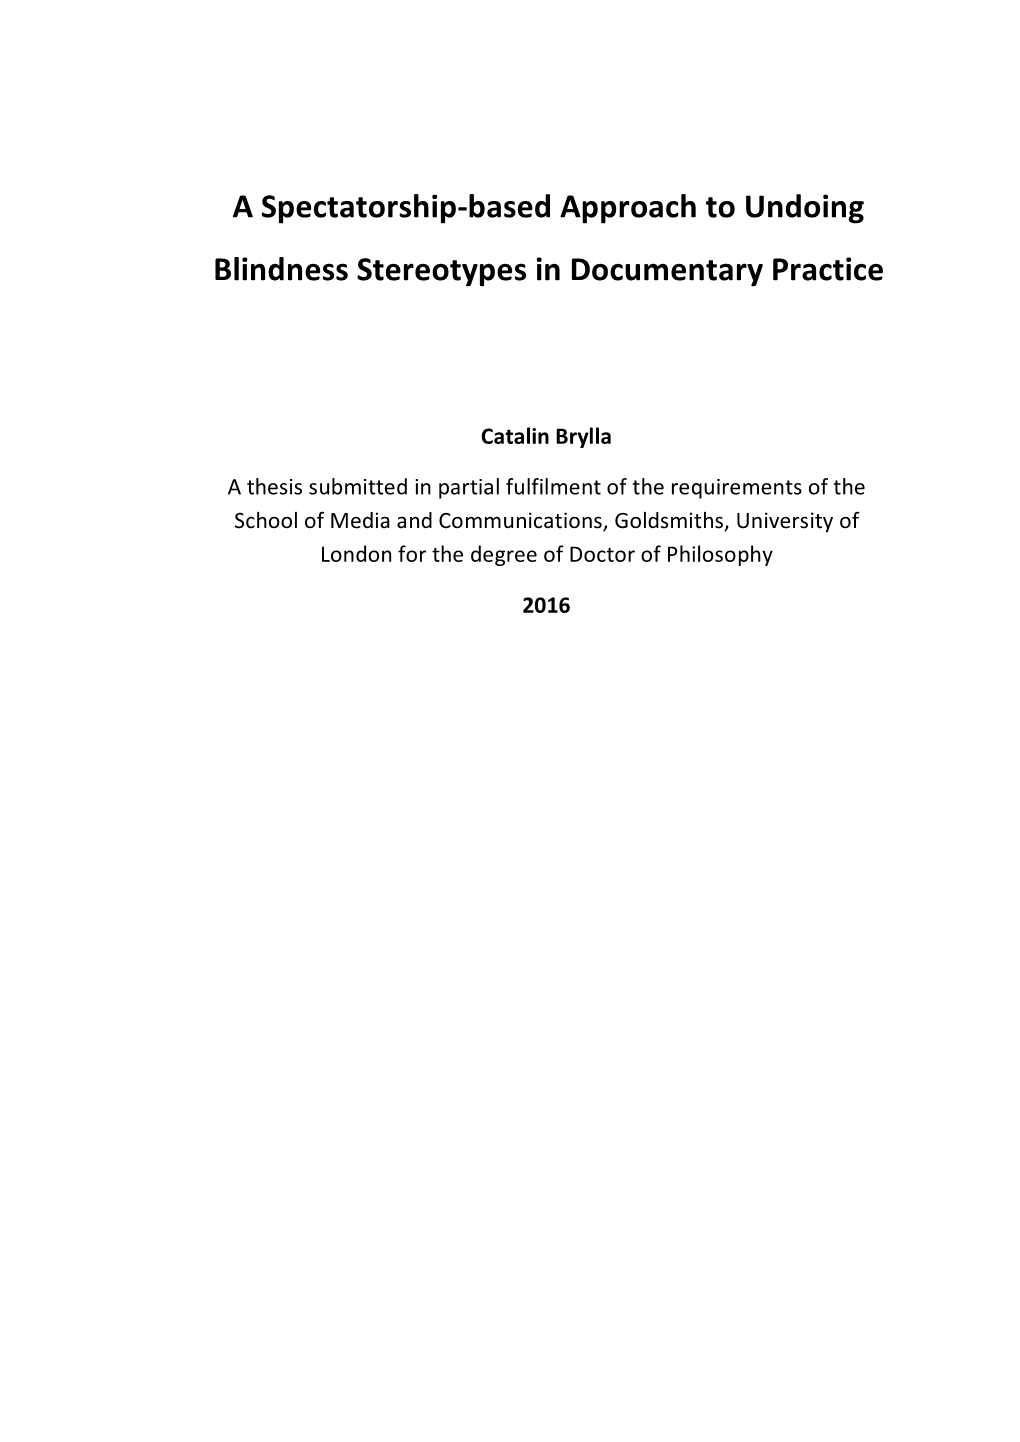 A Spectatorship-Based Approach to Undoing Blindness Stereotypes in Documentary Practice